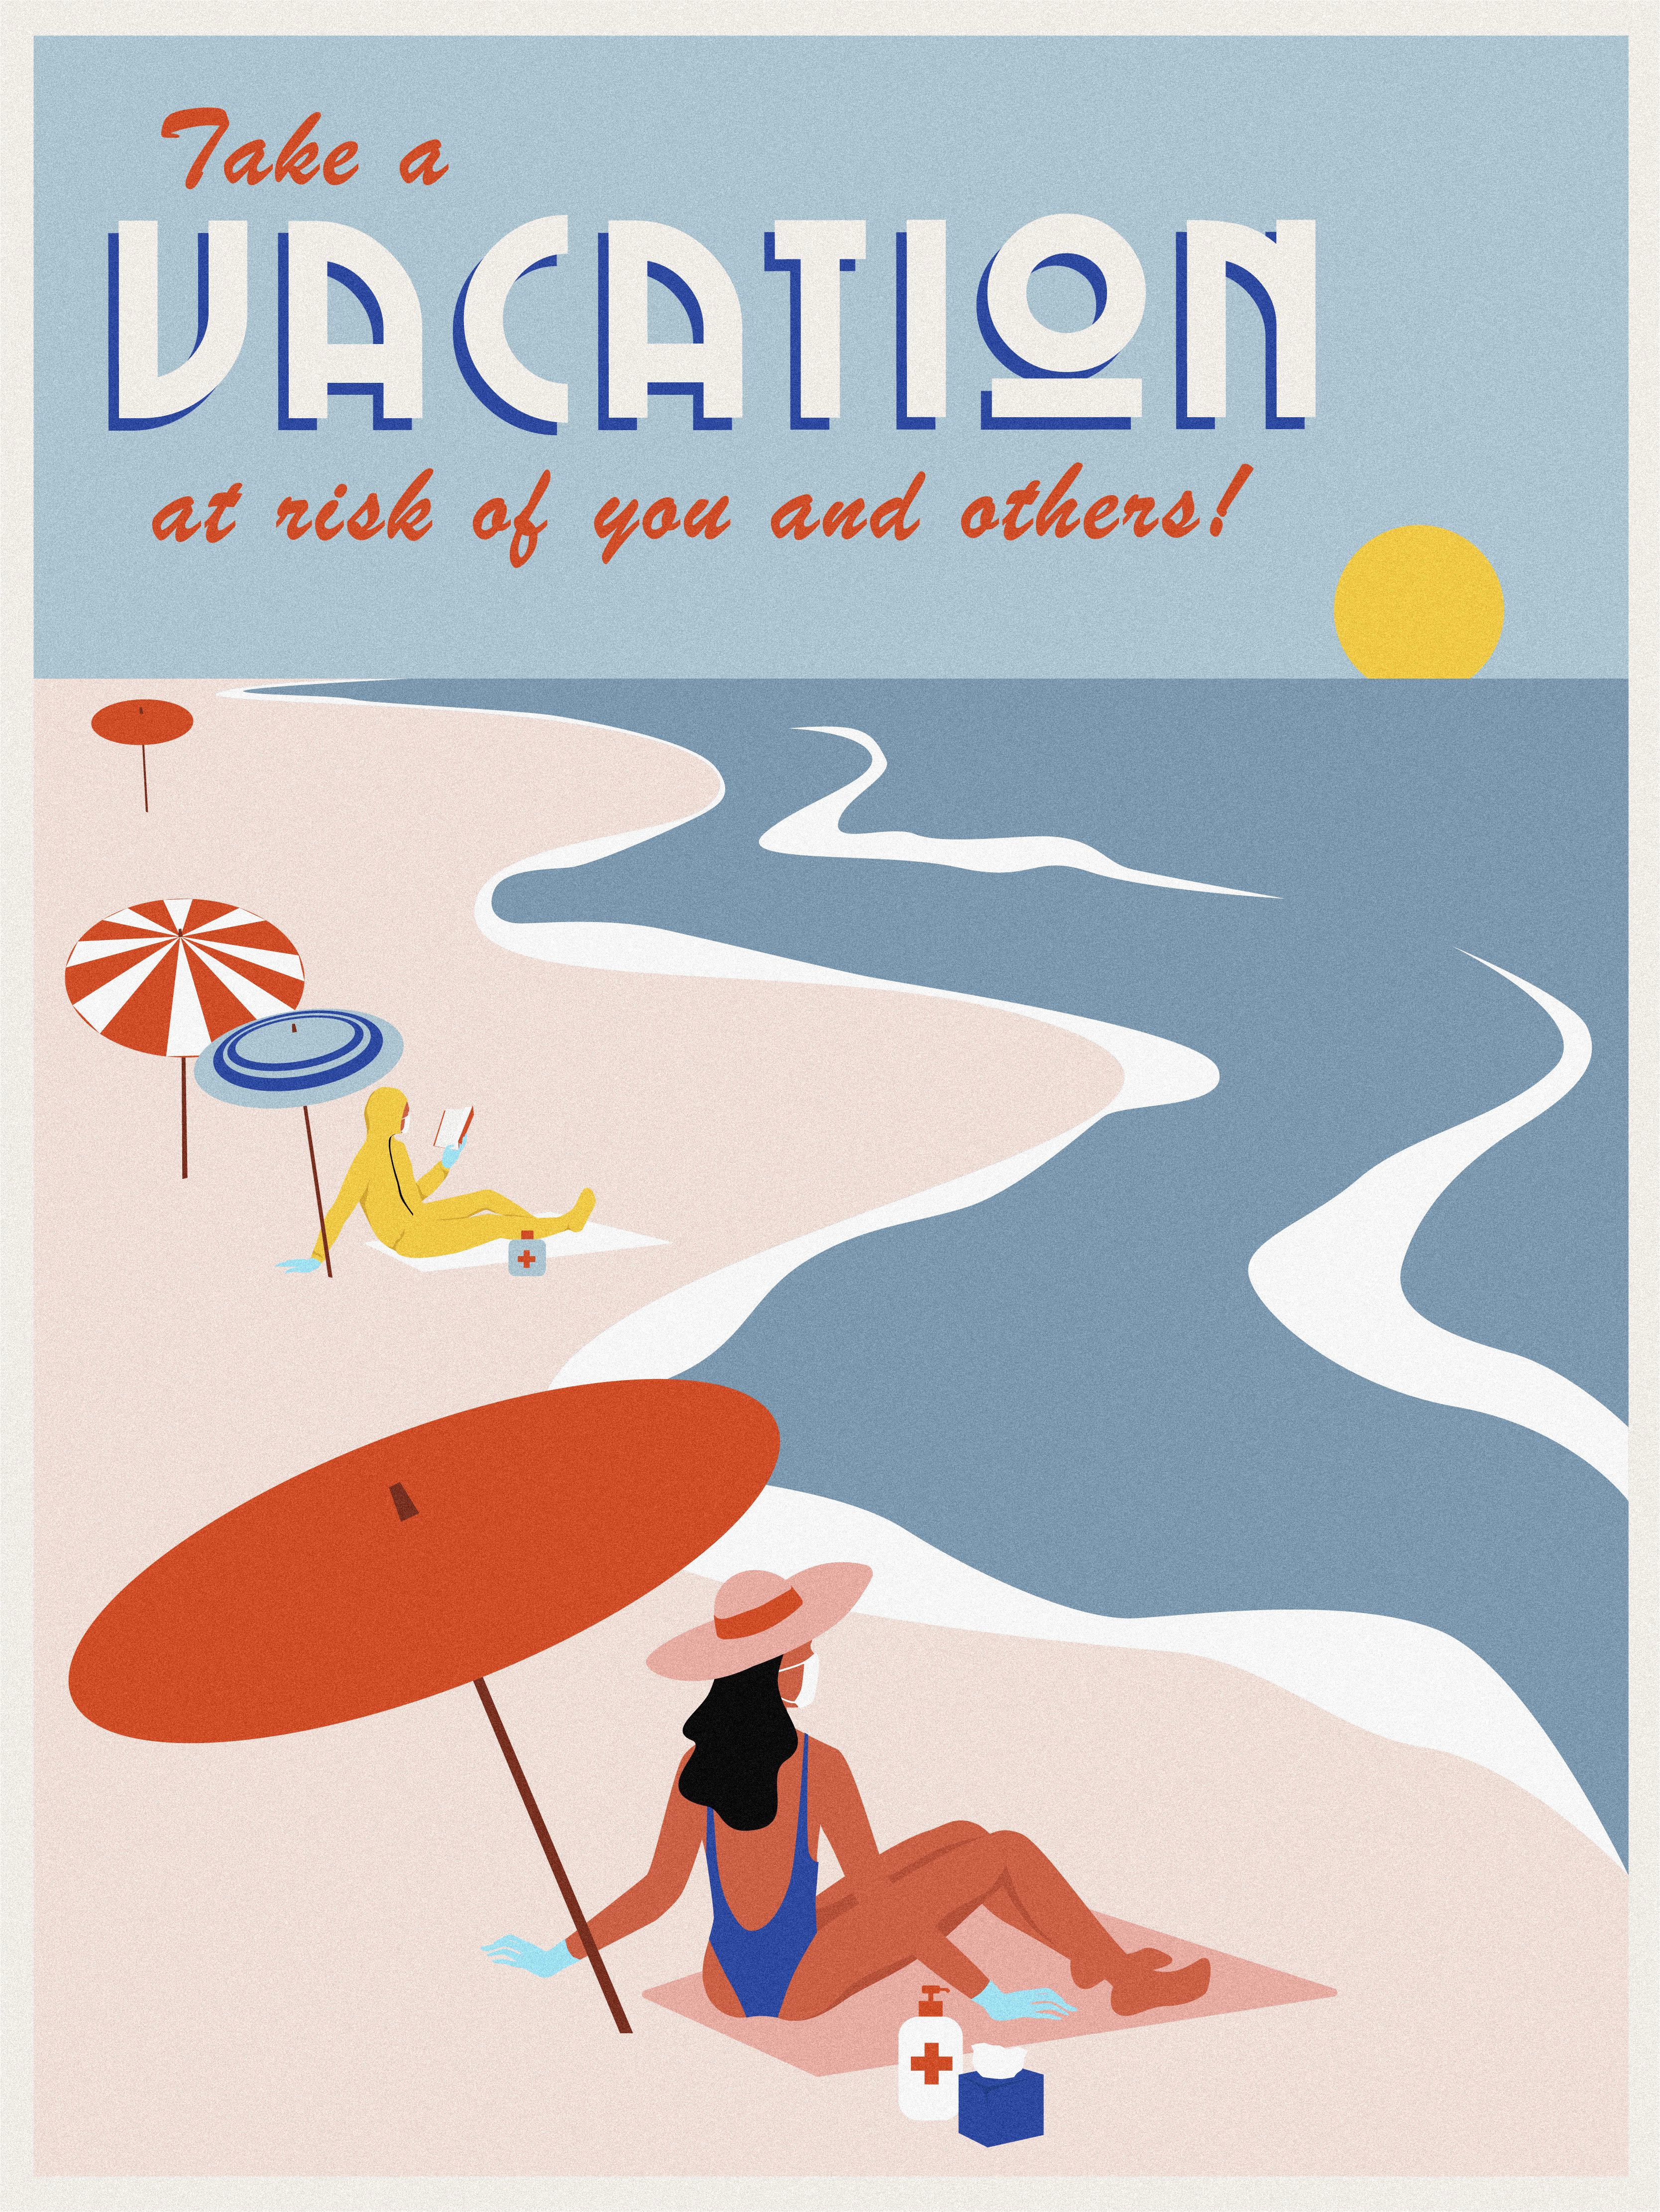 These travel posters spring from our favorite books (photos)